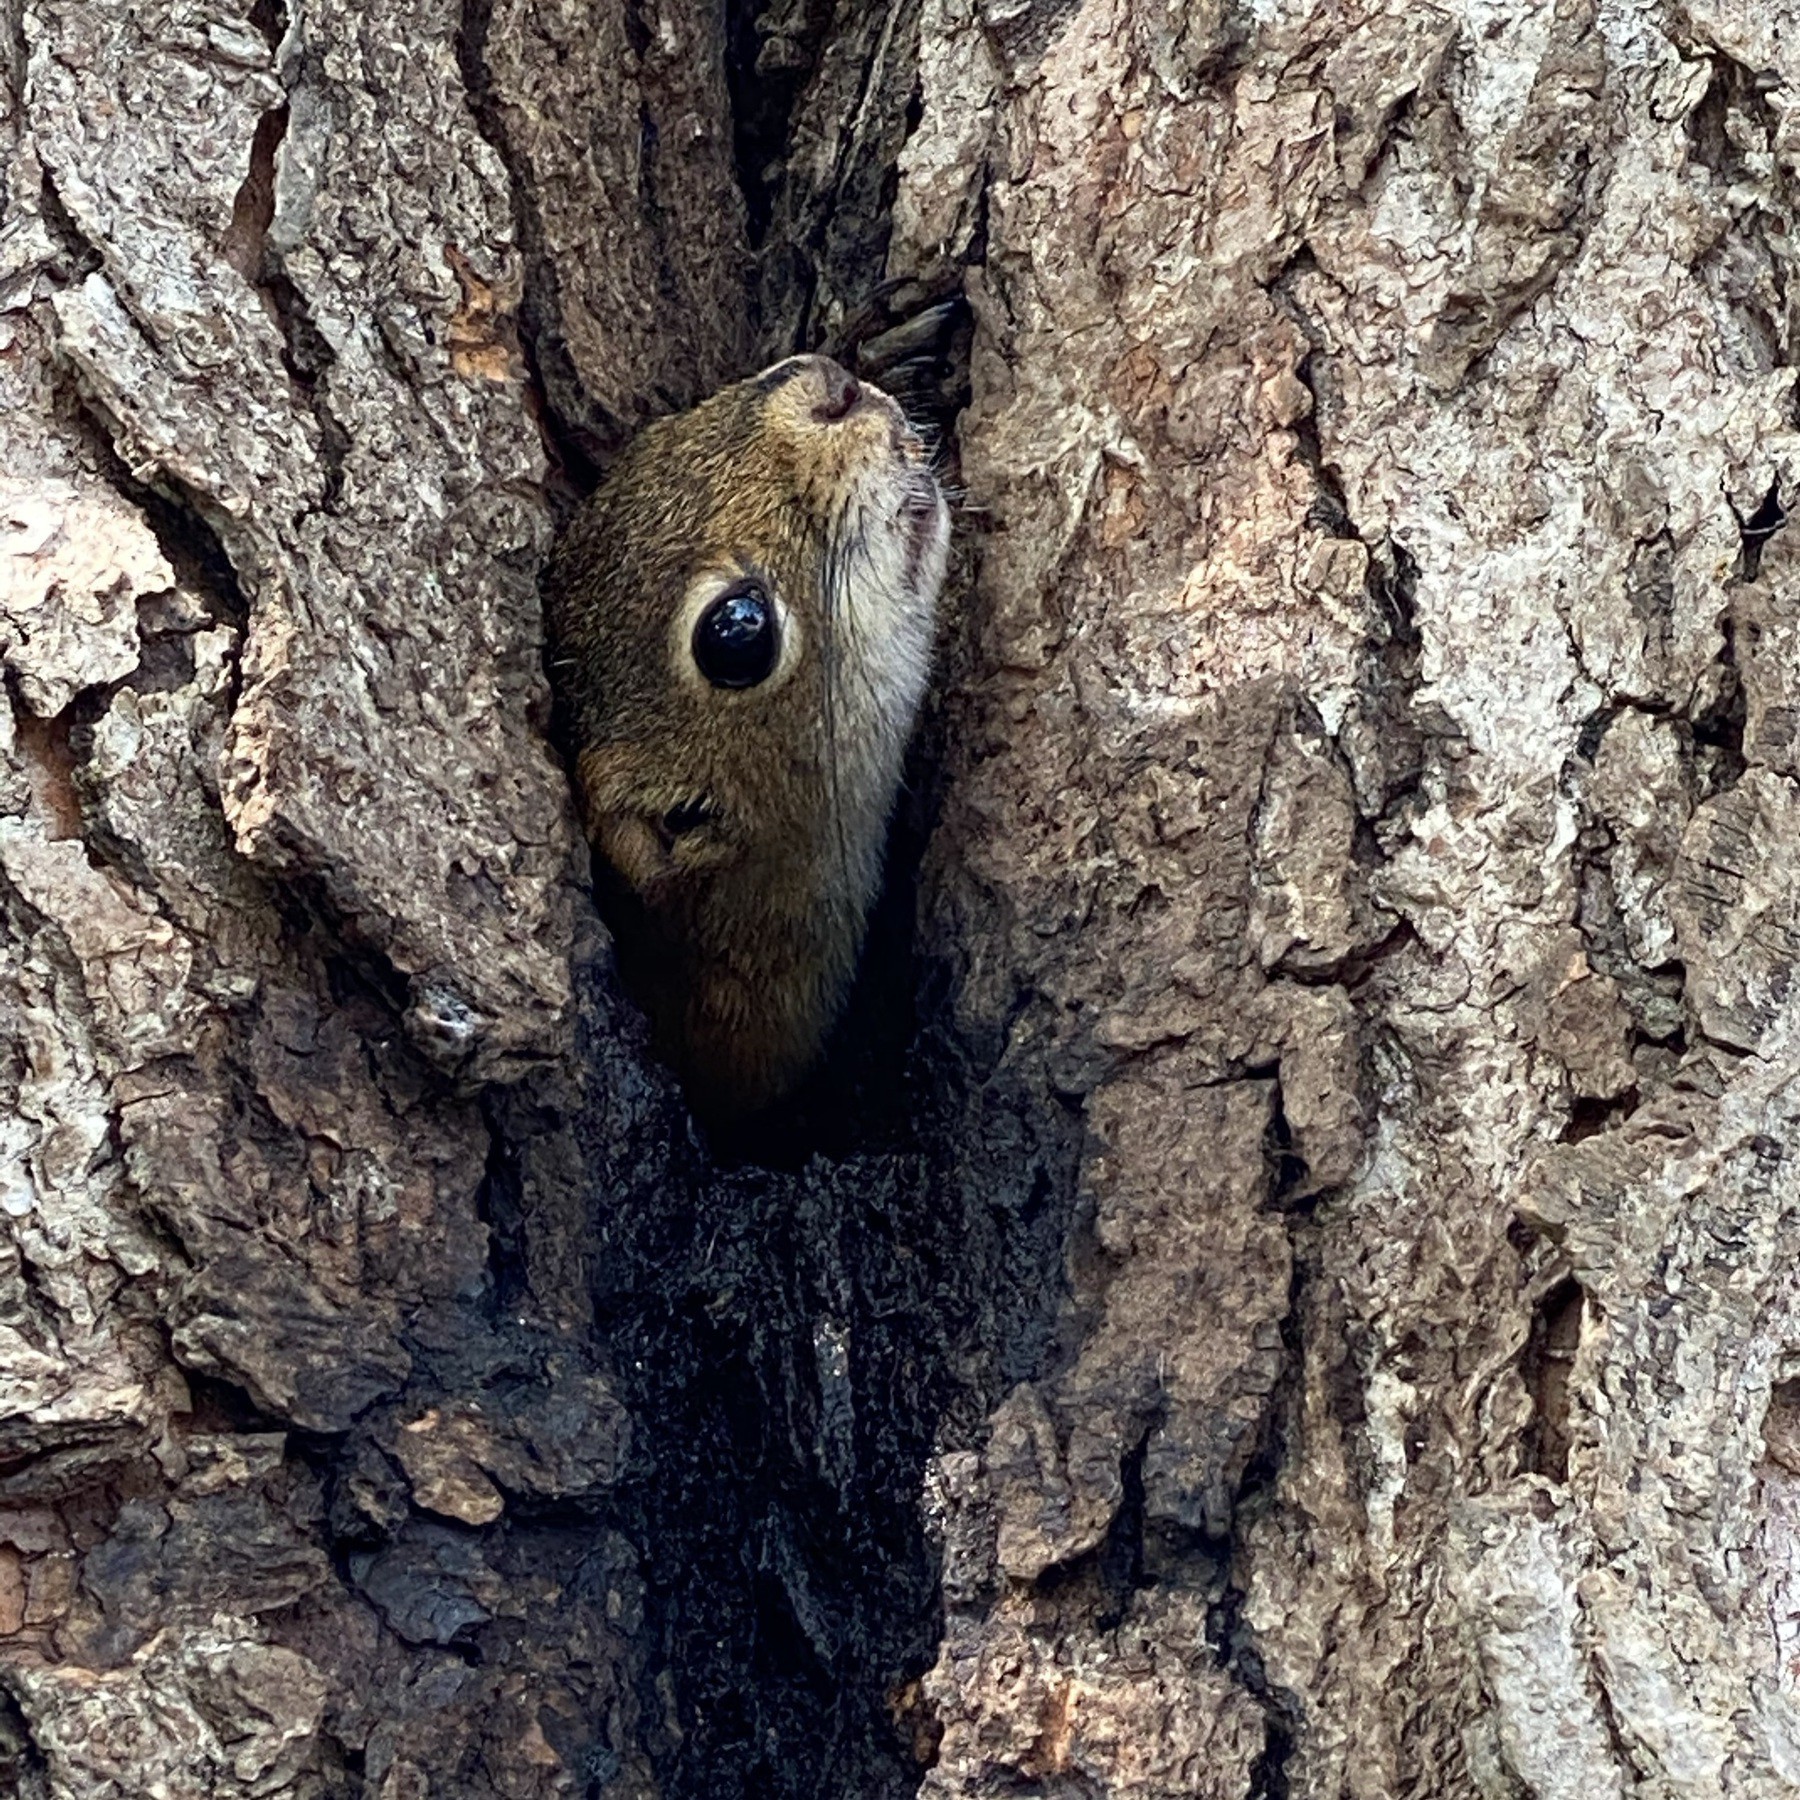 Squirrel in crevice in a tree.